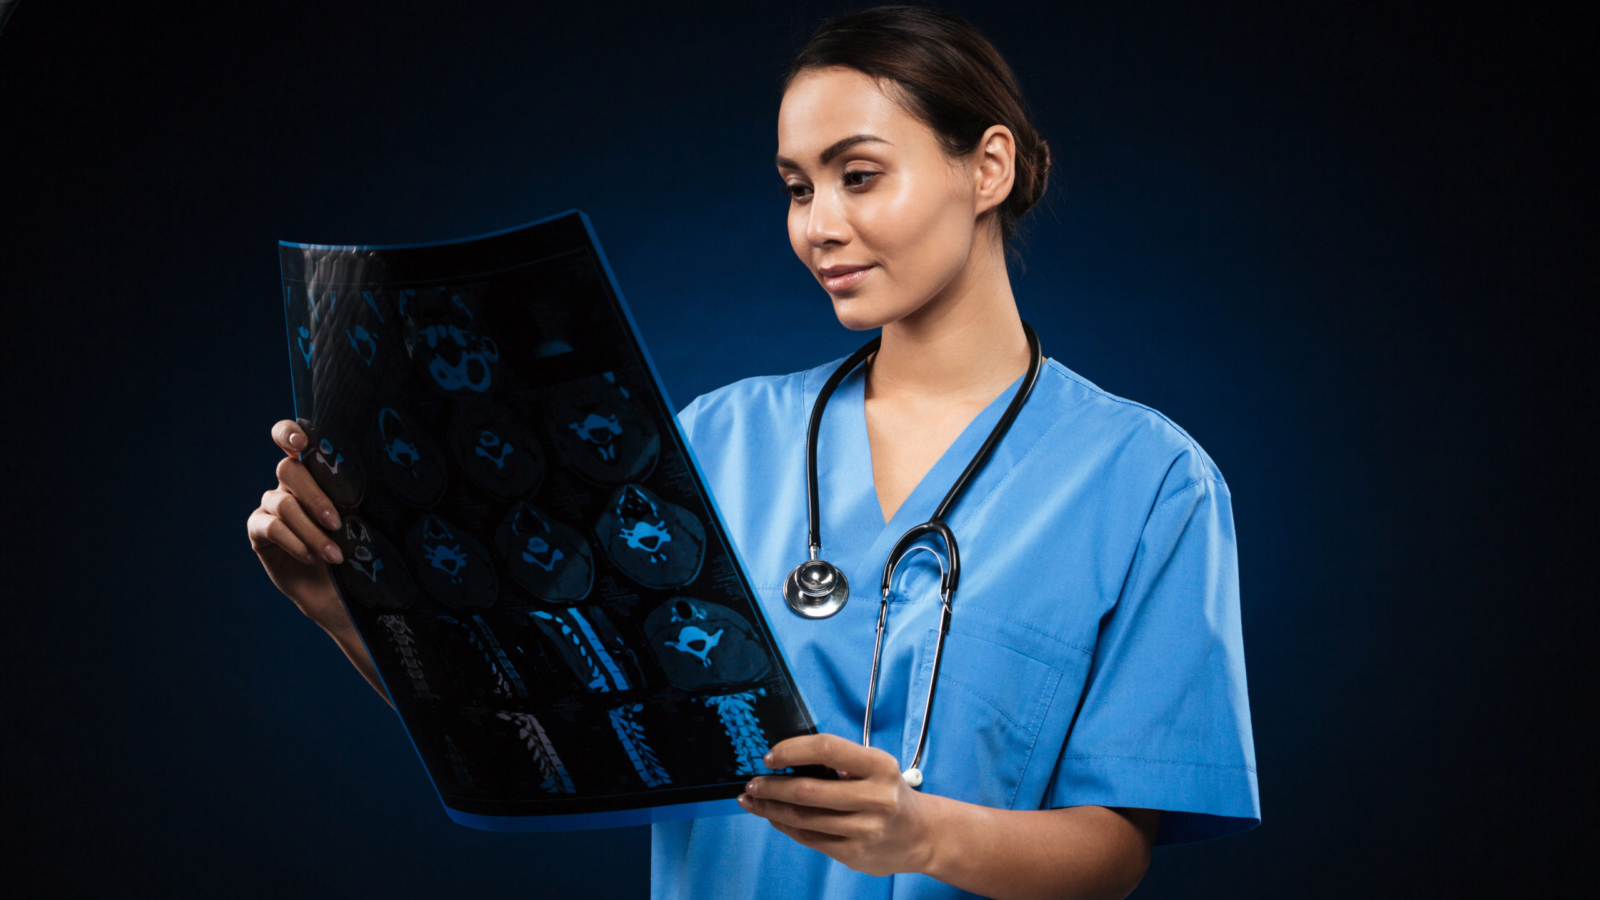 Young concentrated lady doctor with stethoscope looking at x-ray image isolated